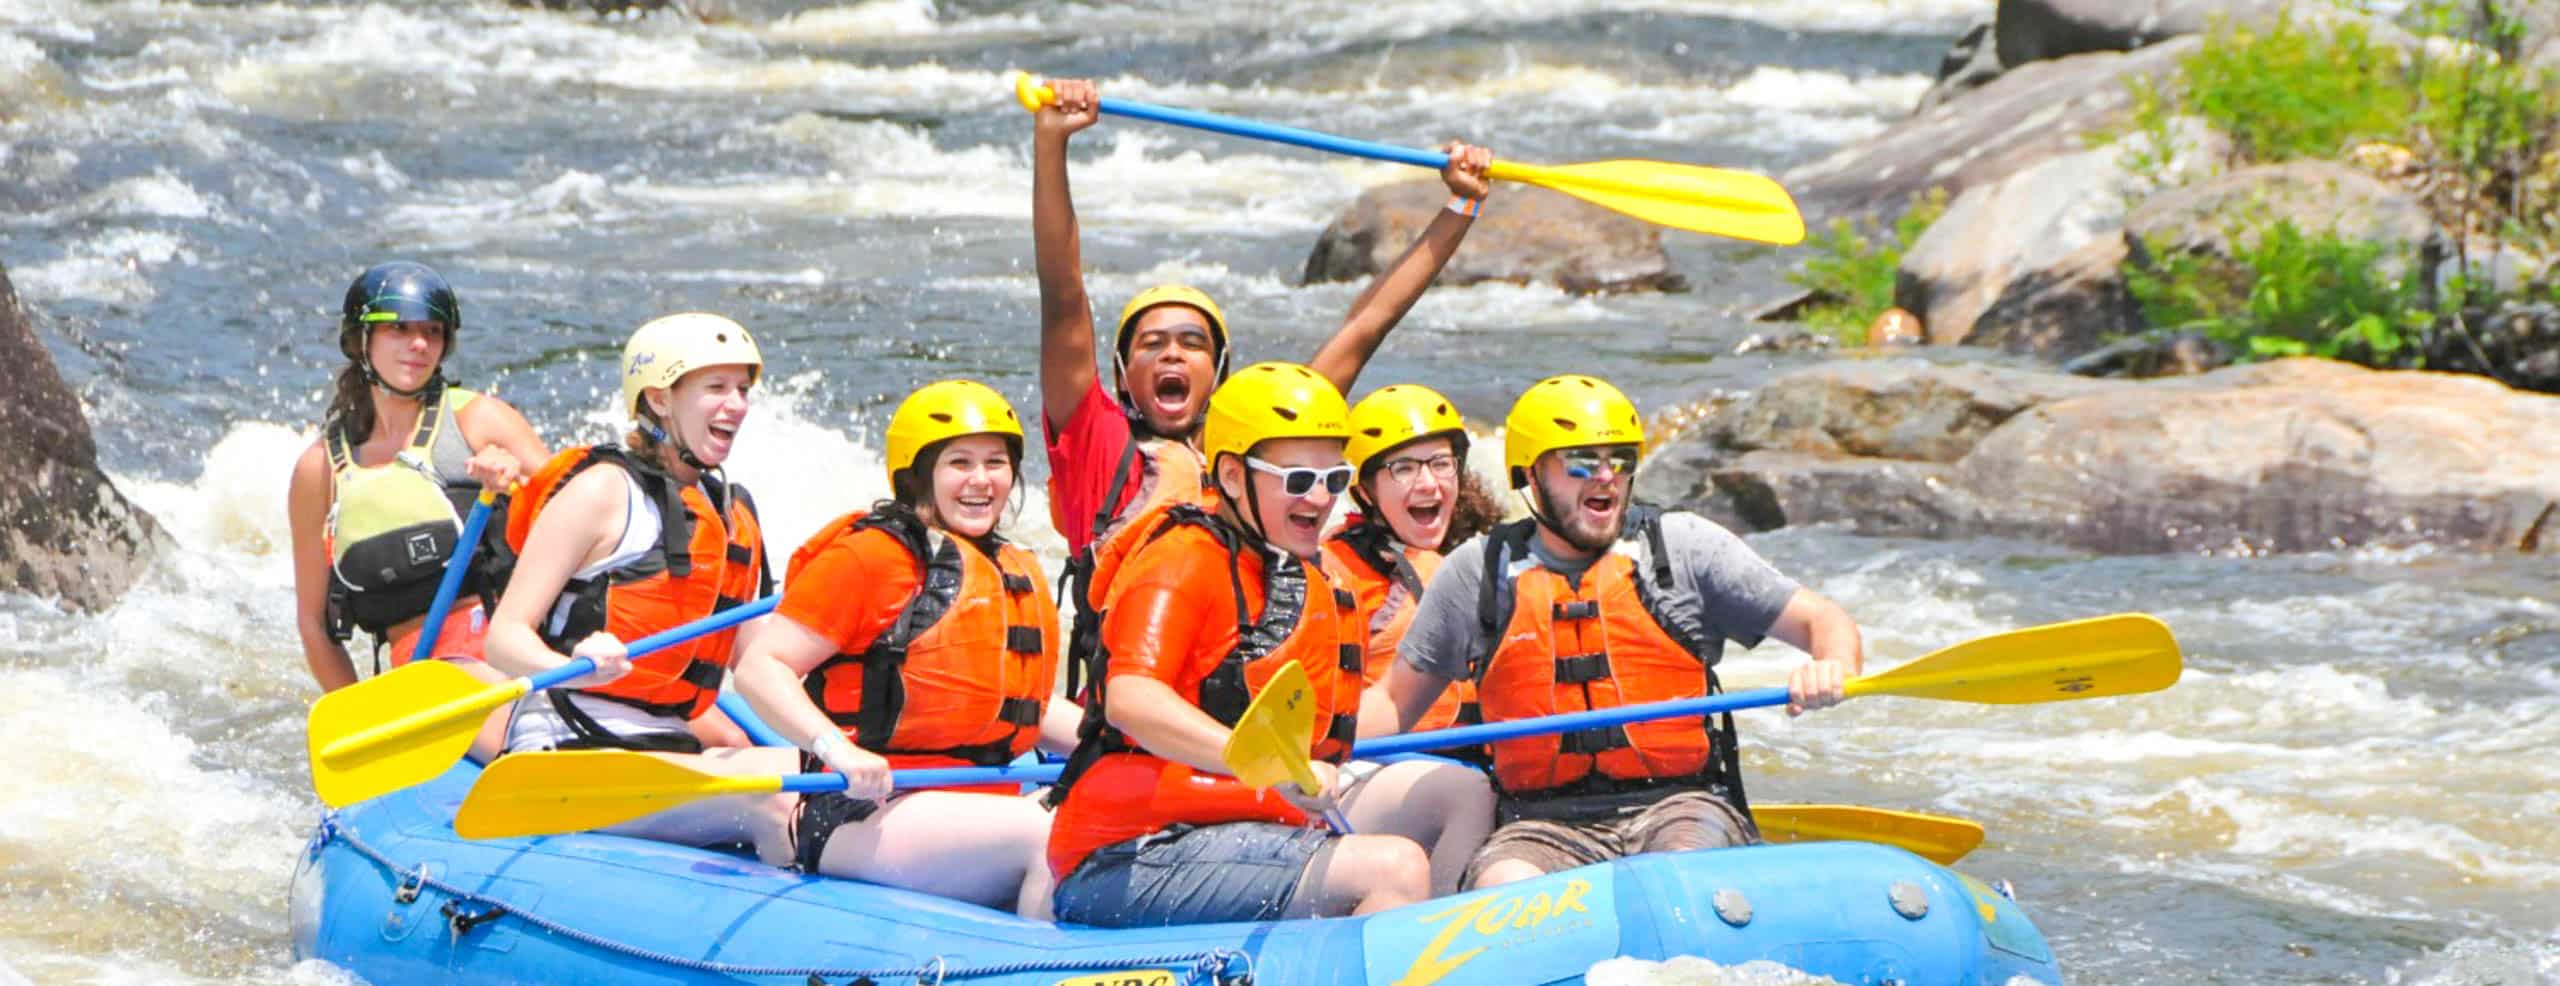 Group of people excitedly rafting on the river at Zoar Outdoor